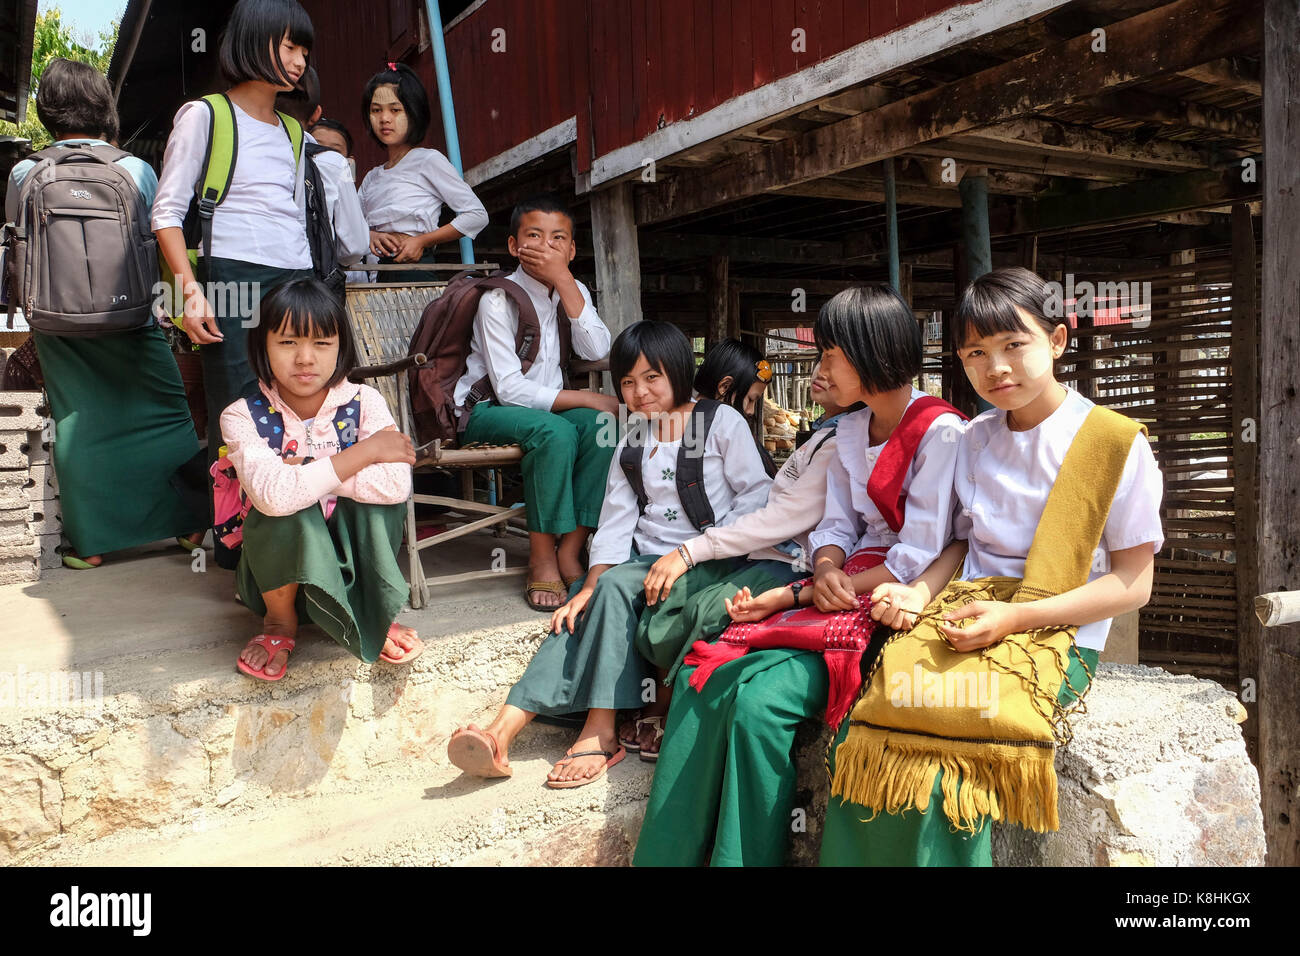 Burma, Myanmar: group of pupils in the village of Seinkaung, Inle Lake. Stock Photo